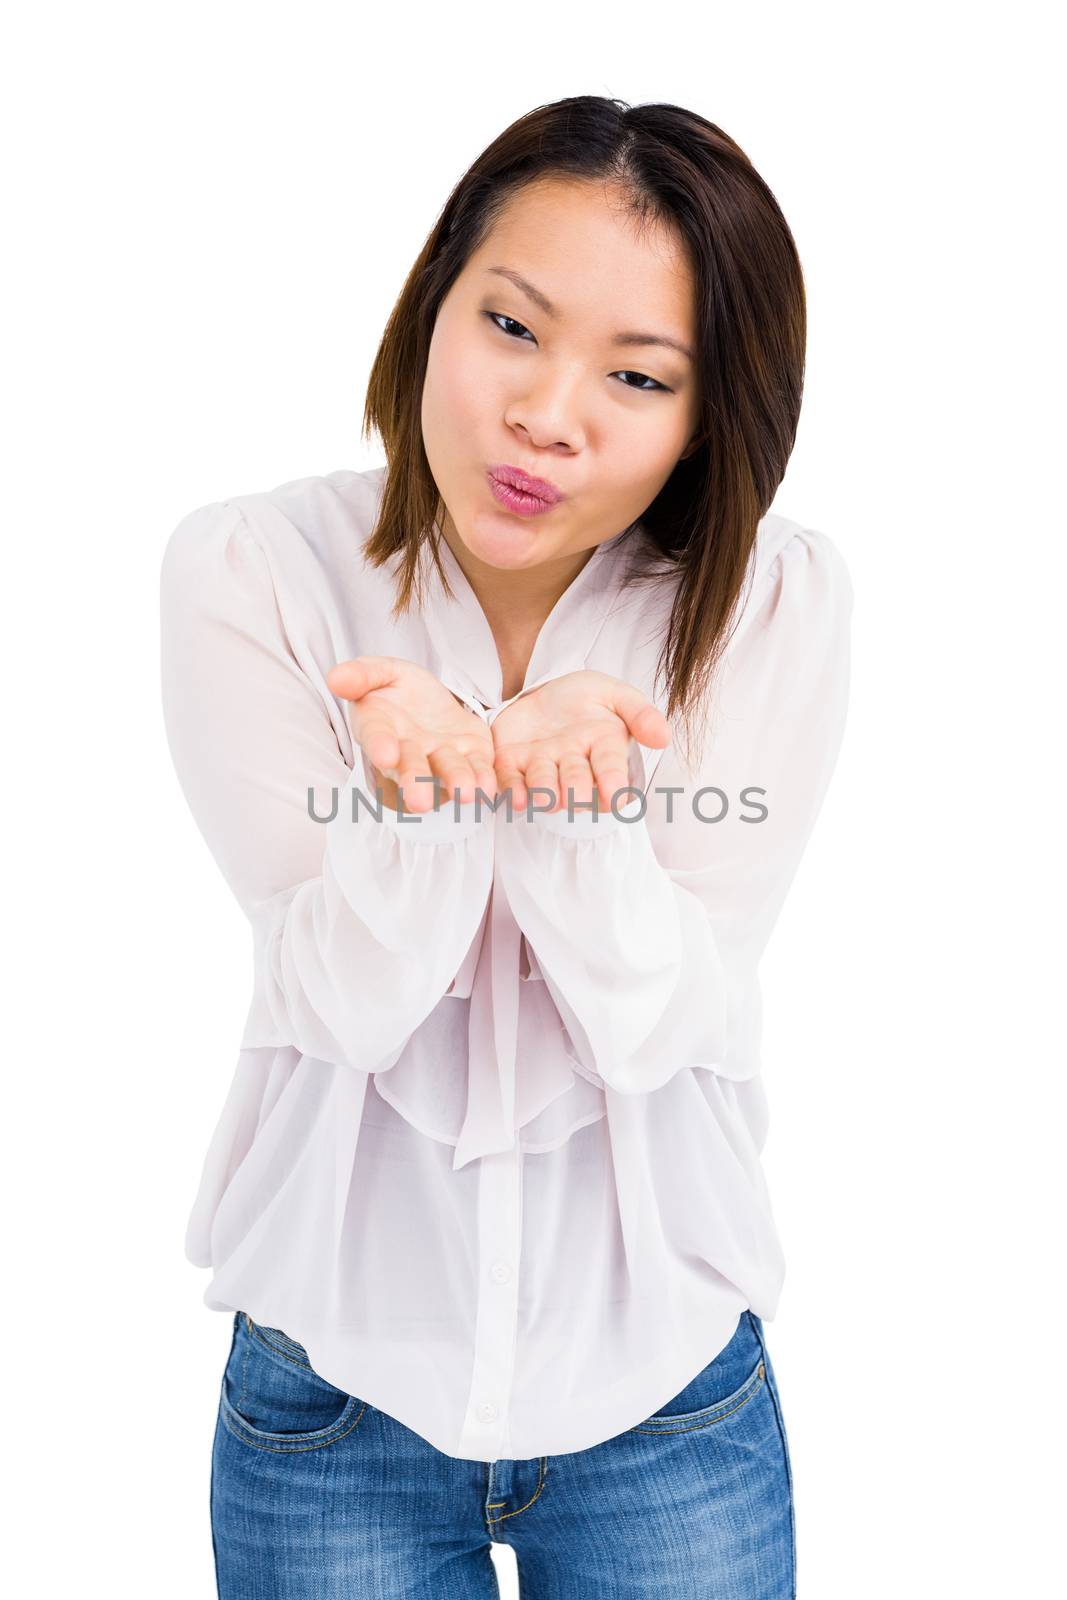 Portrait of woman blowing a kiss to camera on white background